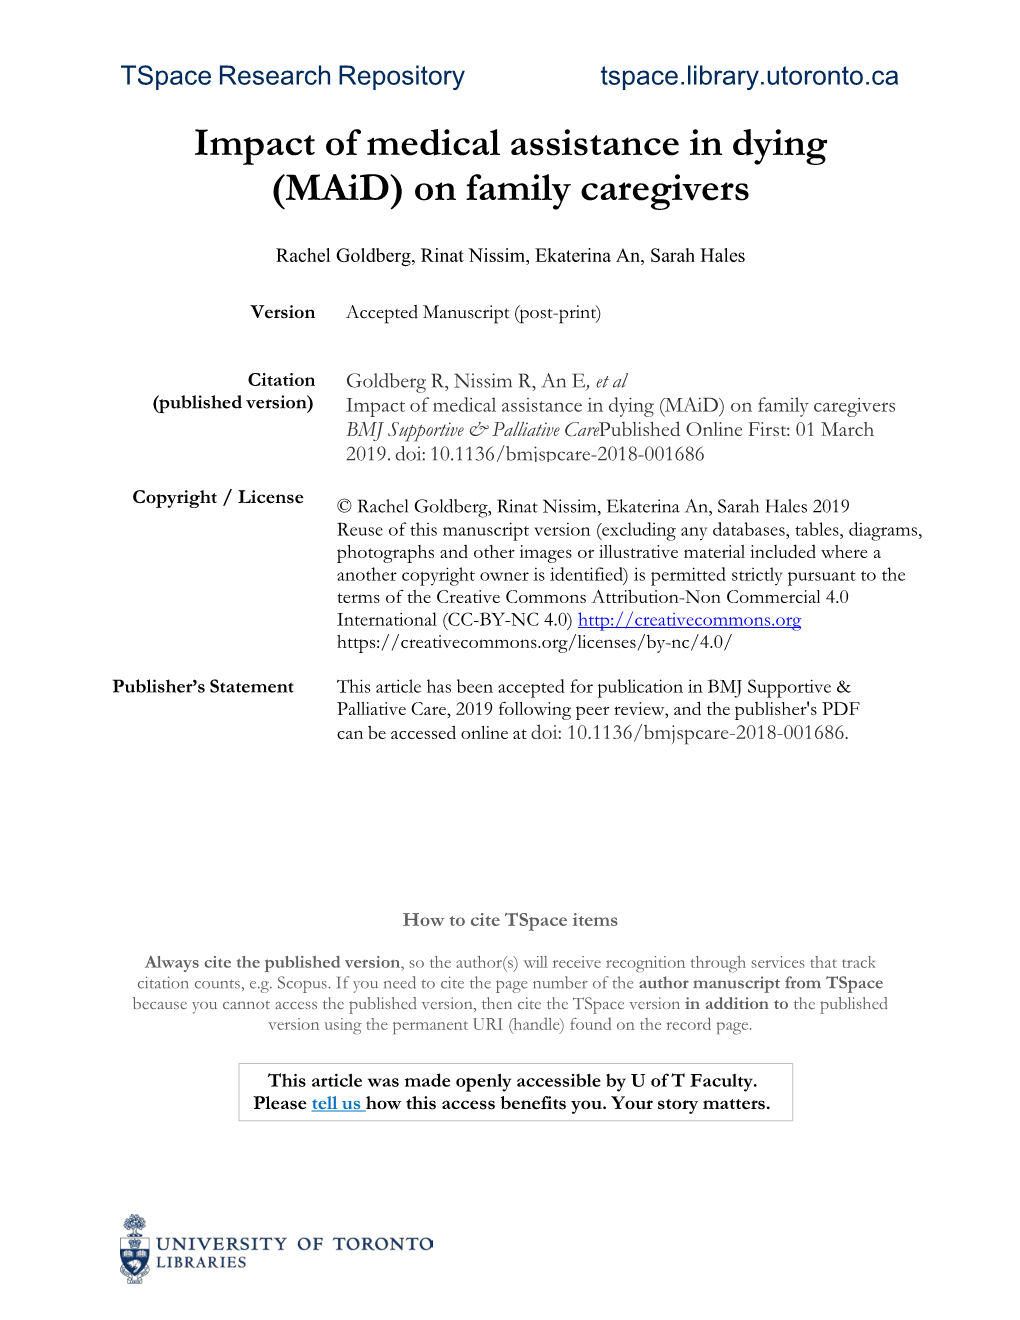 Title: the Impact of Medical Assistance in Dying (Maid) on Family Caregivers